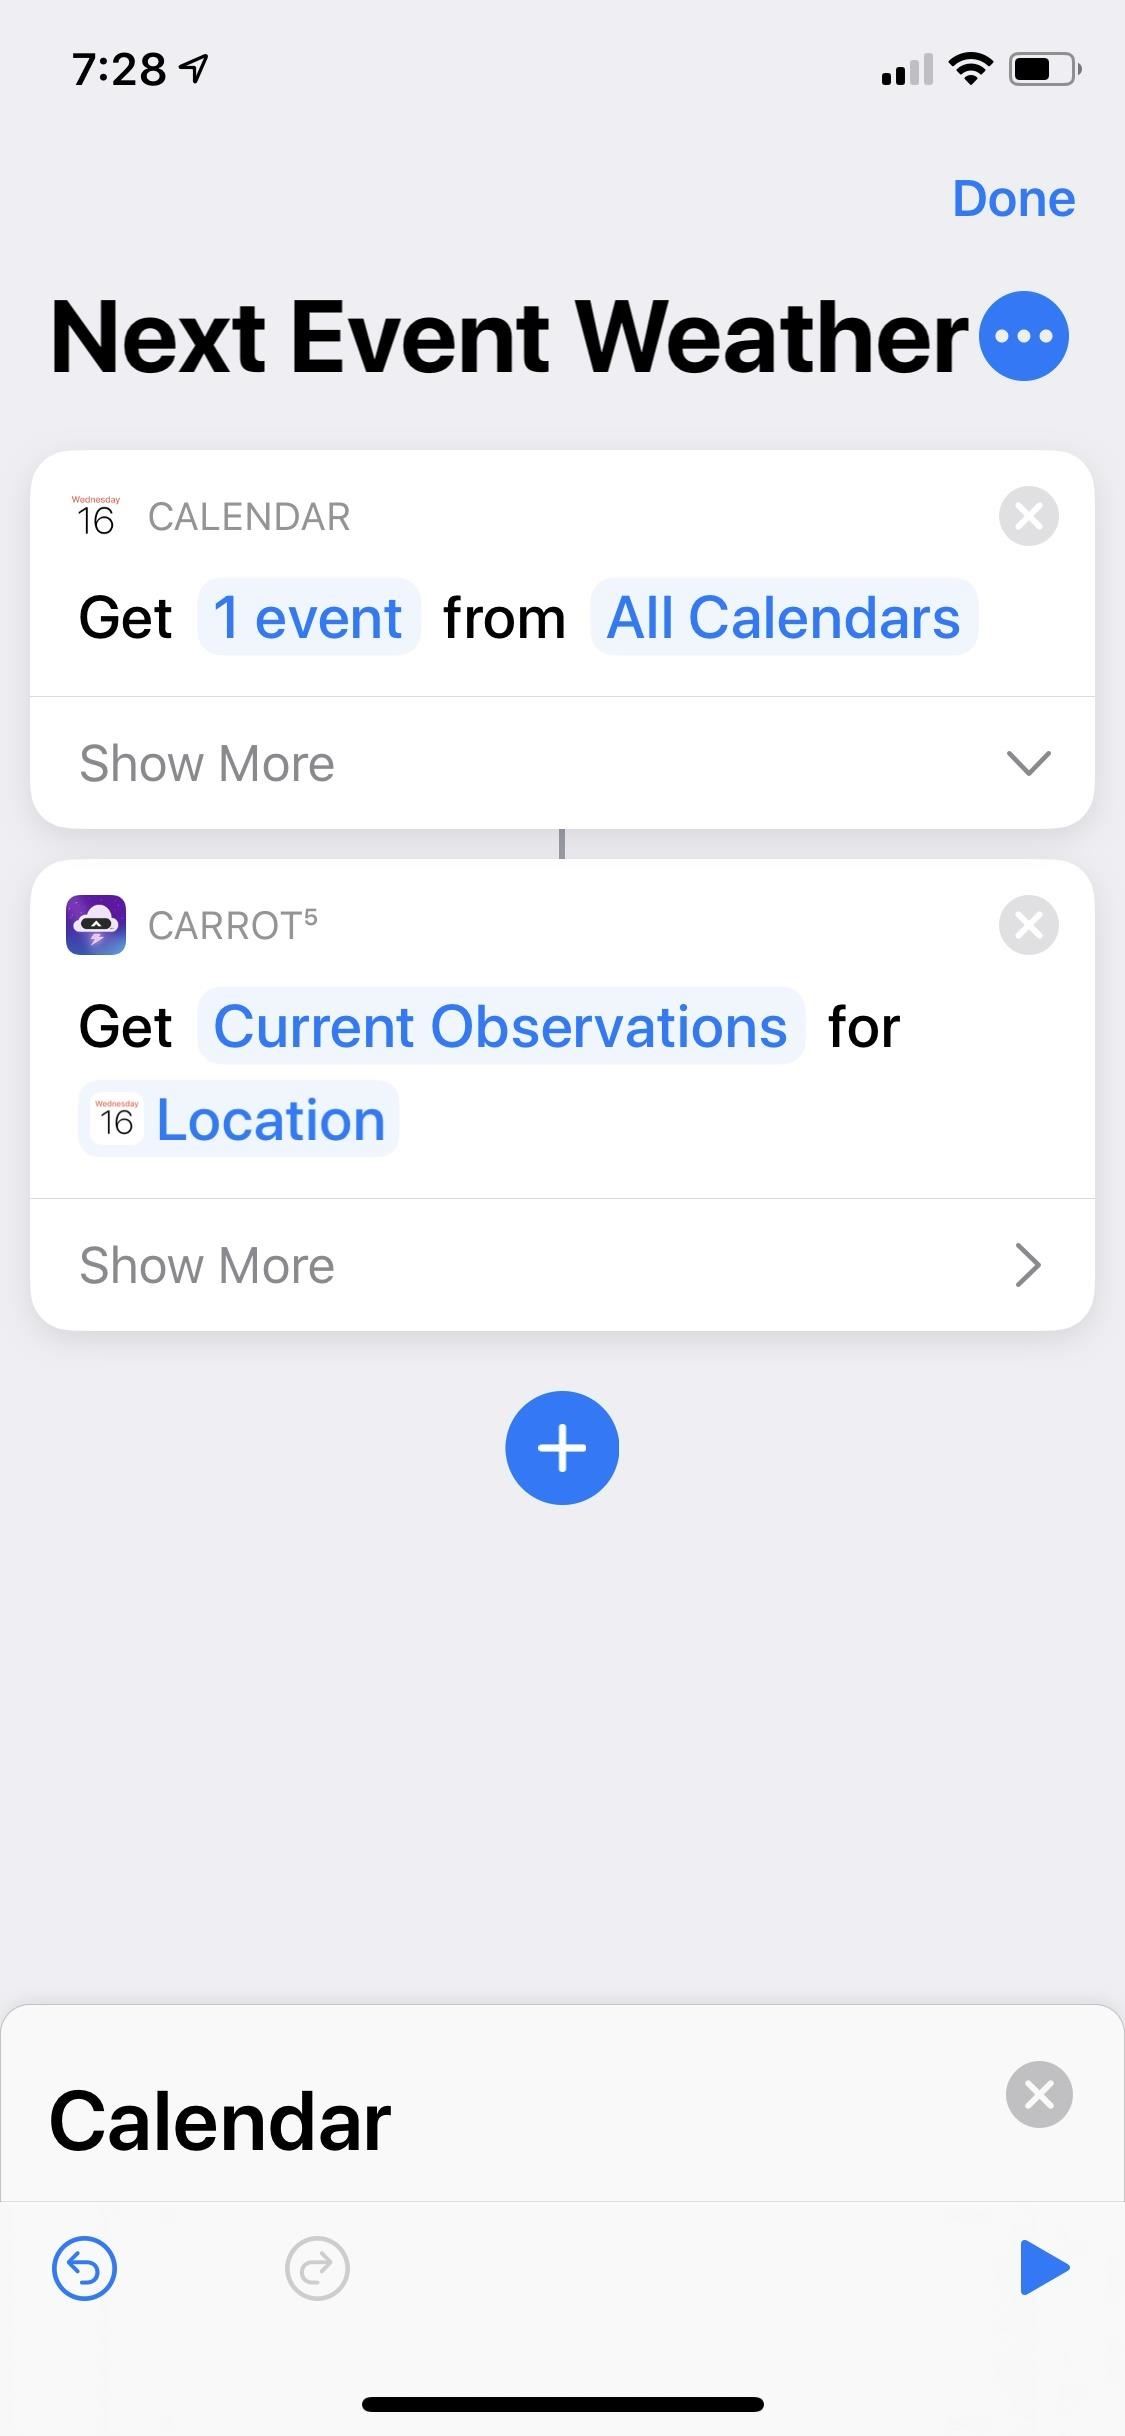 What's New in Shortcuts in iOS 13